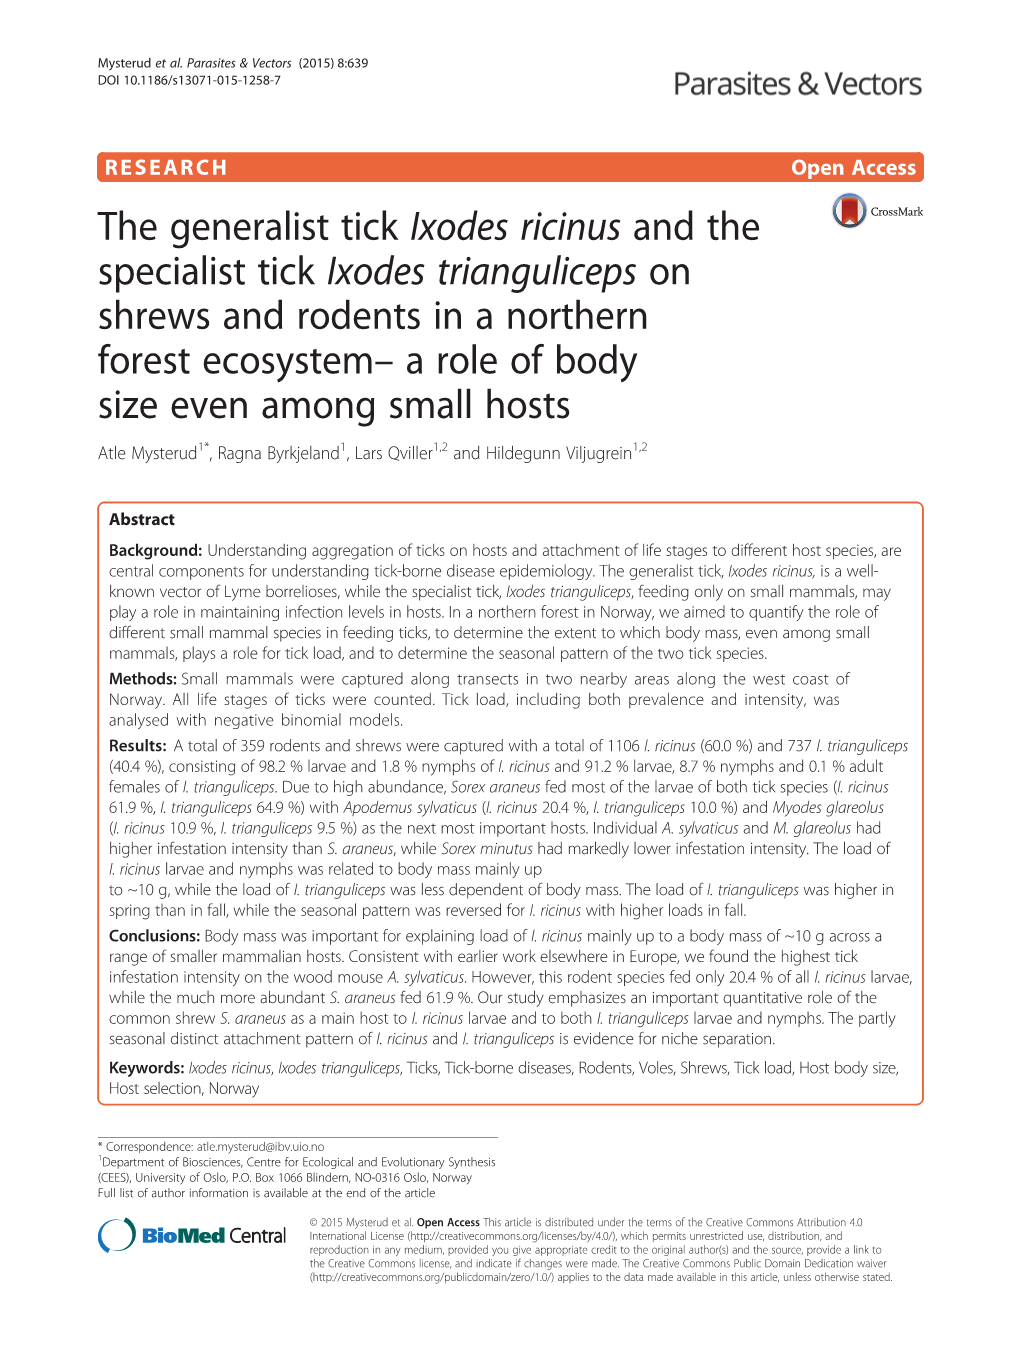 The Generalist Tick Ixodes Ricinus and the Specialist Tick Ixodes Trianguliceps on Shrews and Rodents in a Northern Forest Ecosy